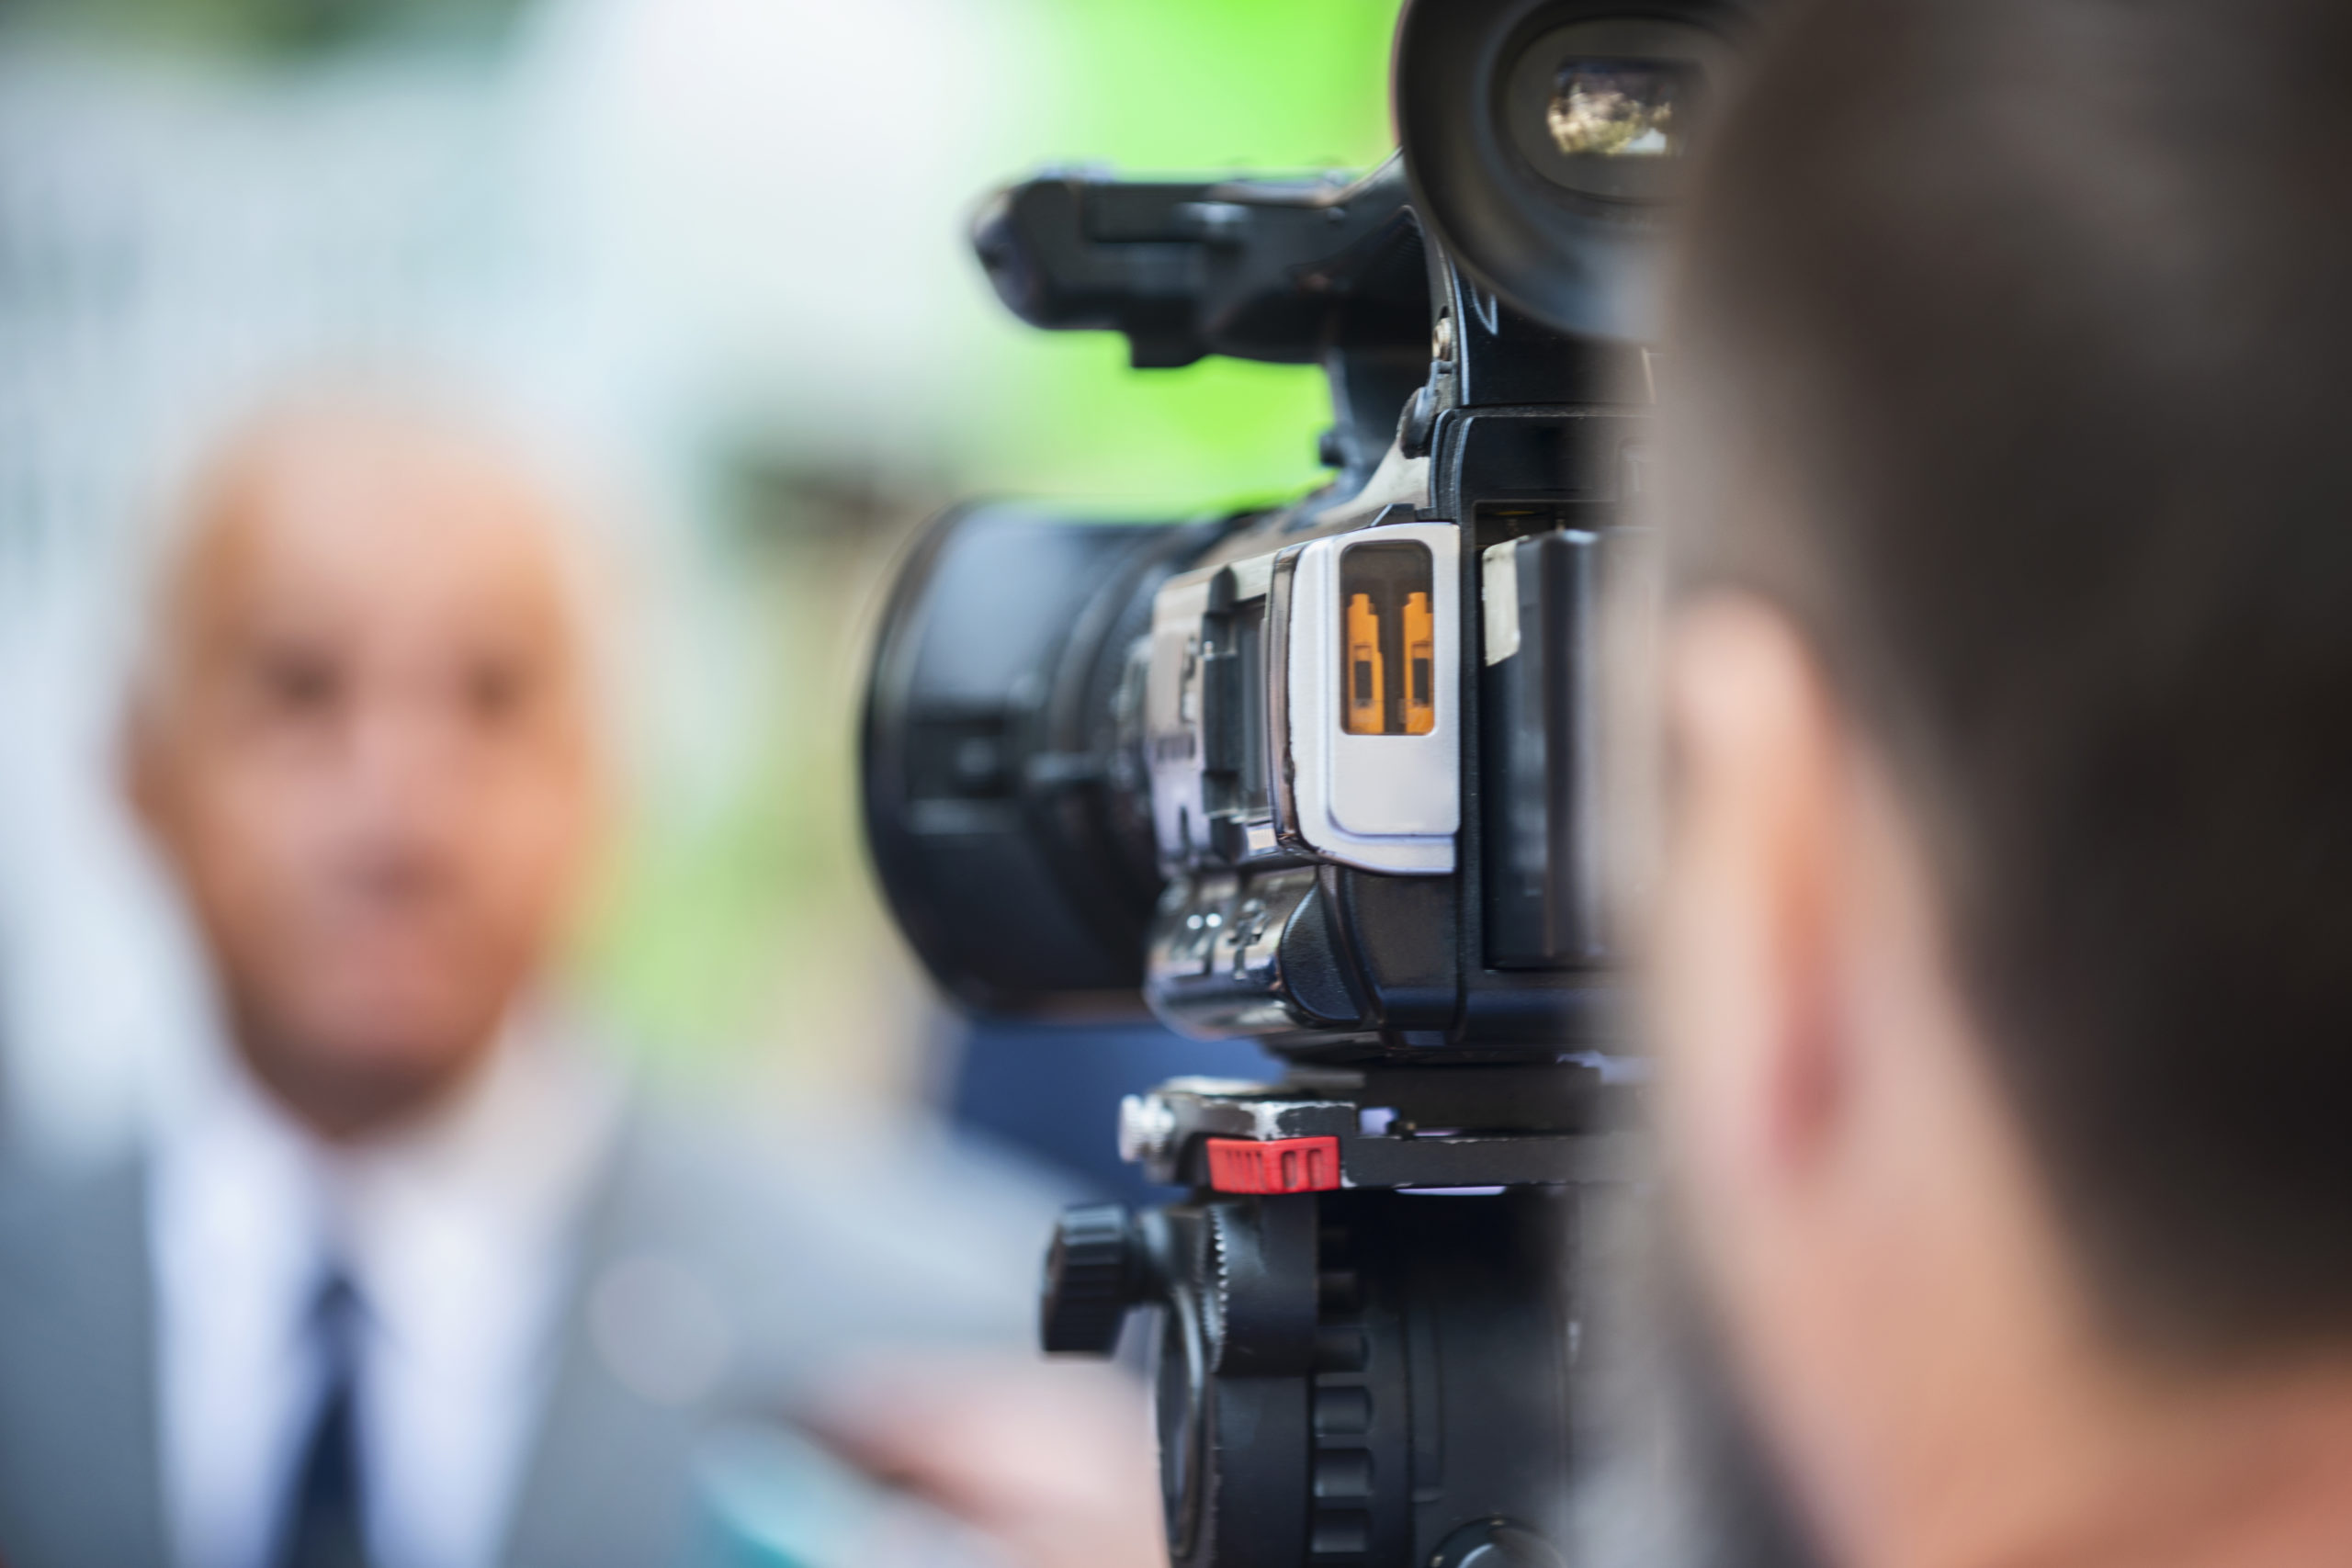 Media Relations: Camera operator working at a press conference outdoors. Journalists interviewing formal dressed politician or businessman at a media event.